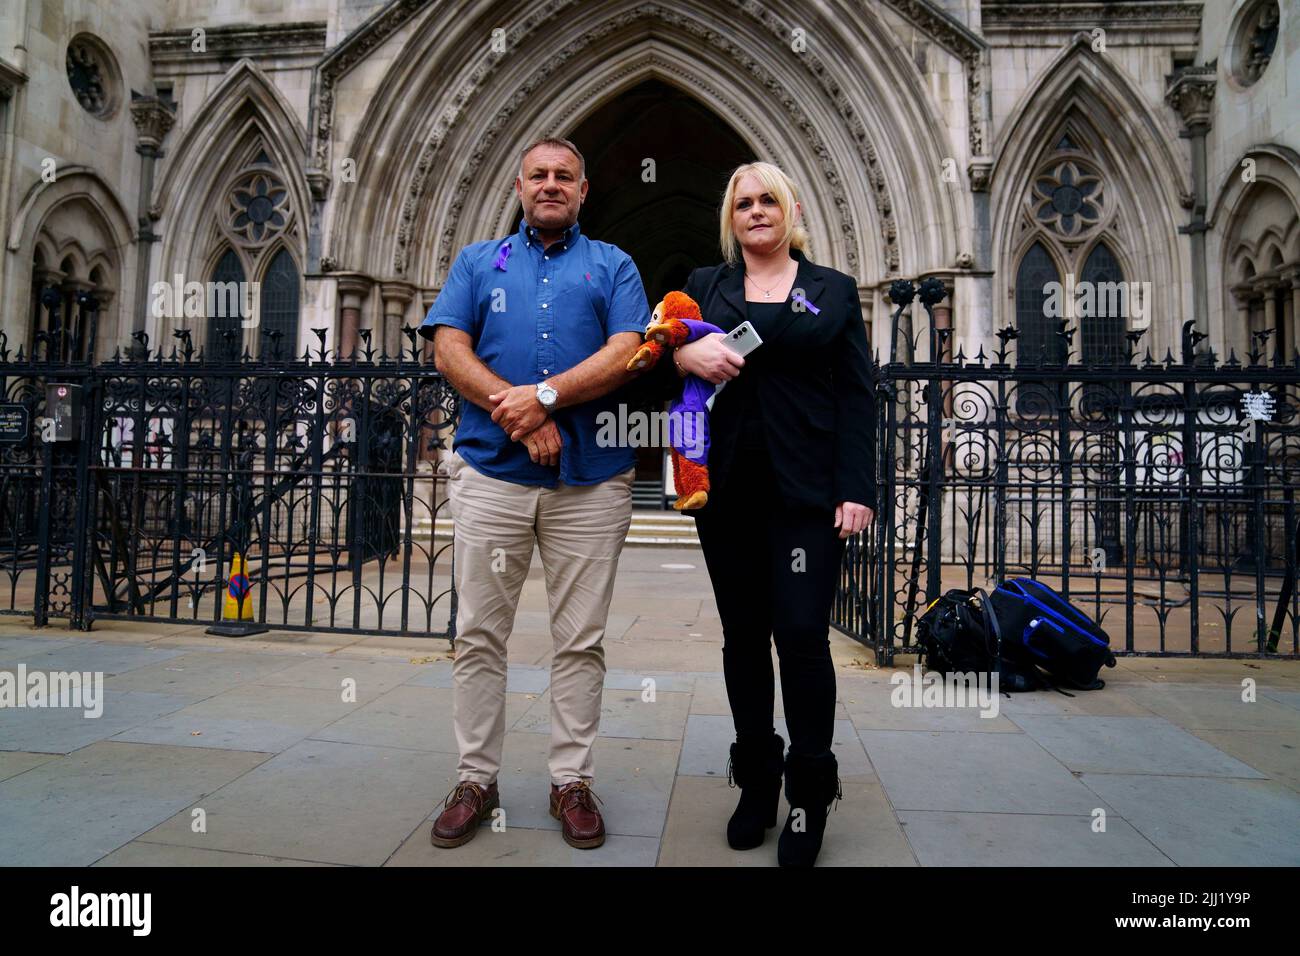 The parents of Archie Battersbee, Paul Battersbee and Hollie Dance, leave the Royal Courts Of Justice in London, they want Court of Appeal judges to overturn a ruling by High Court judge Mr Justice Hayden, who decided that life-support treatment for their 12-year-old son who suffered a 'devastating' brain injury could stop. Picture date: Friday July 22, 2022. Stock Photo